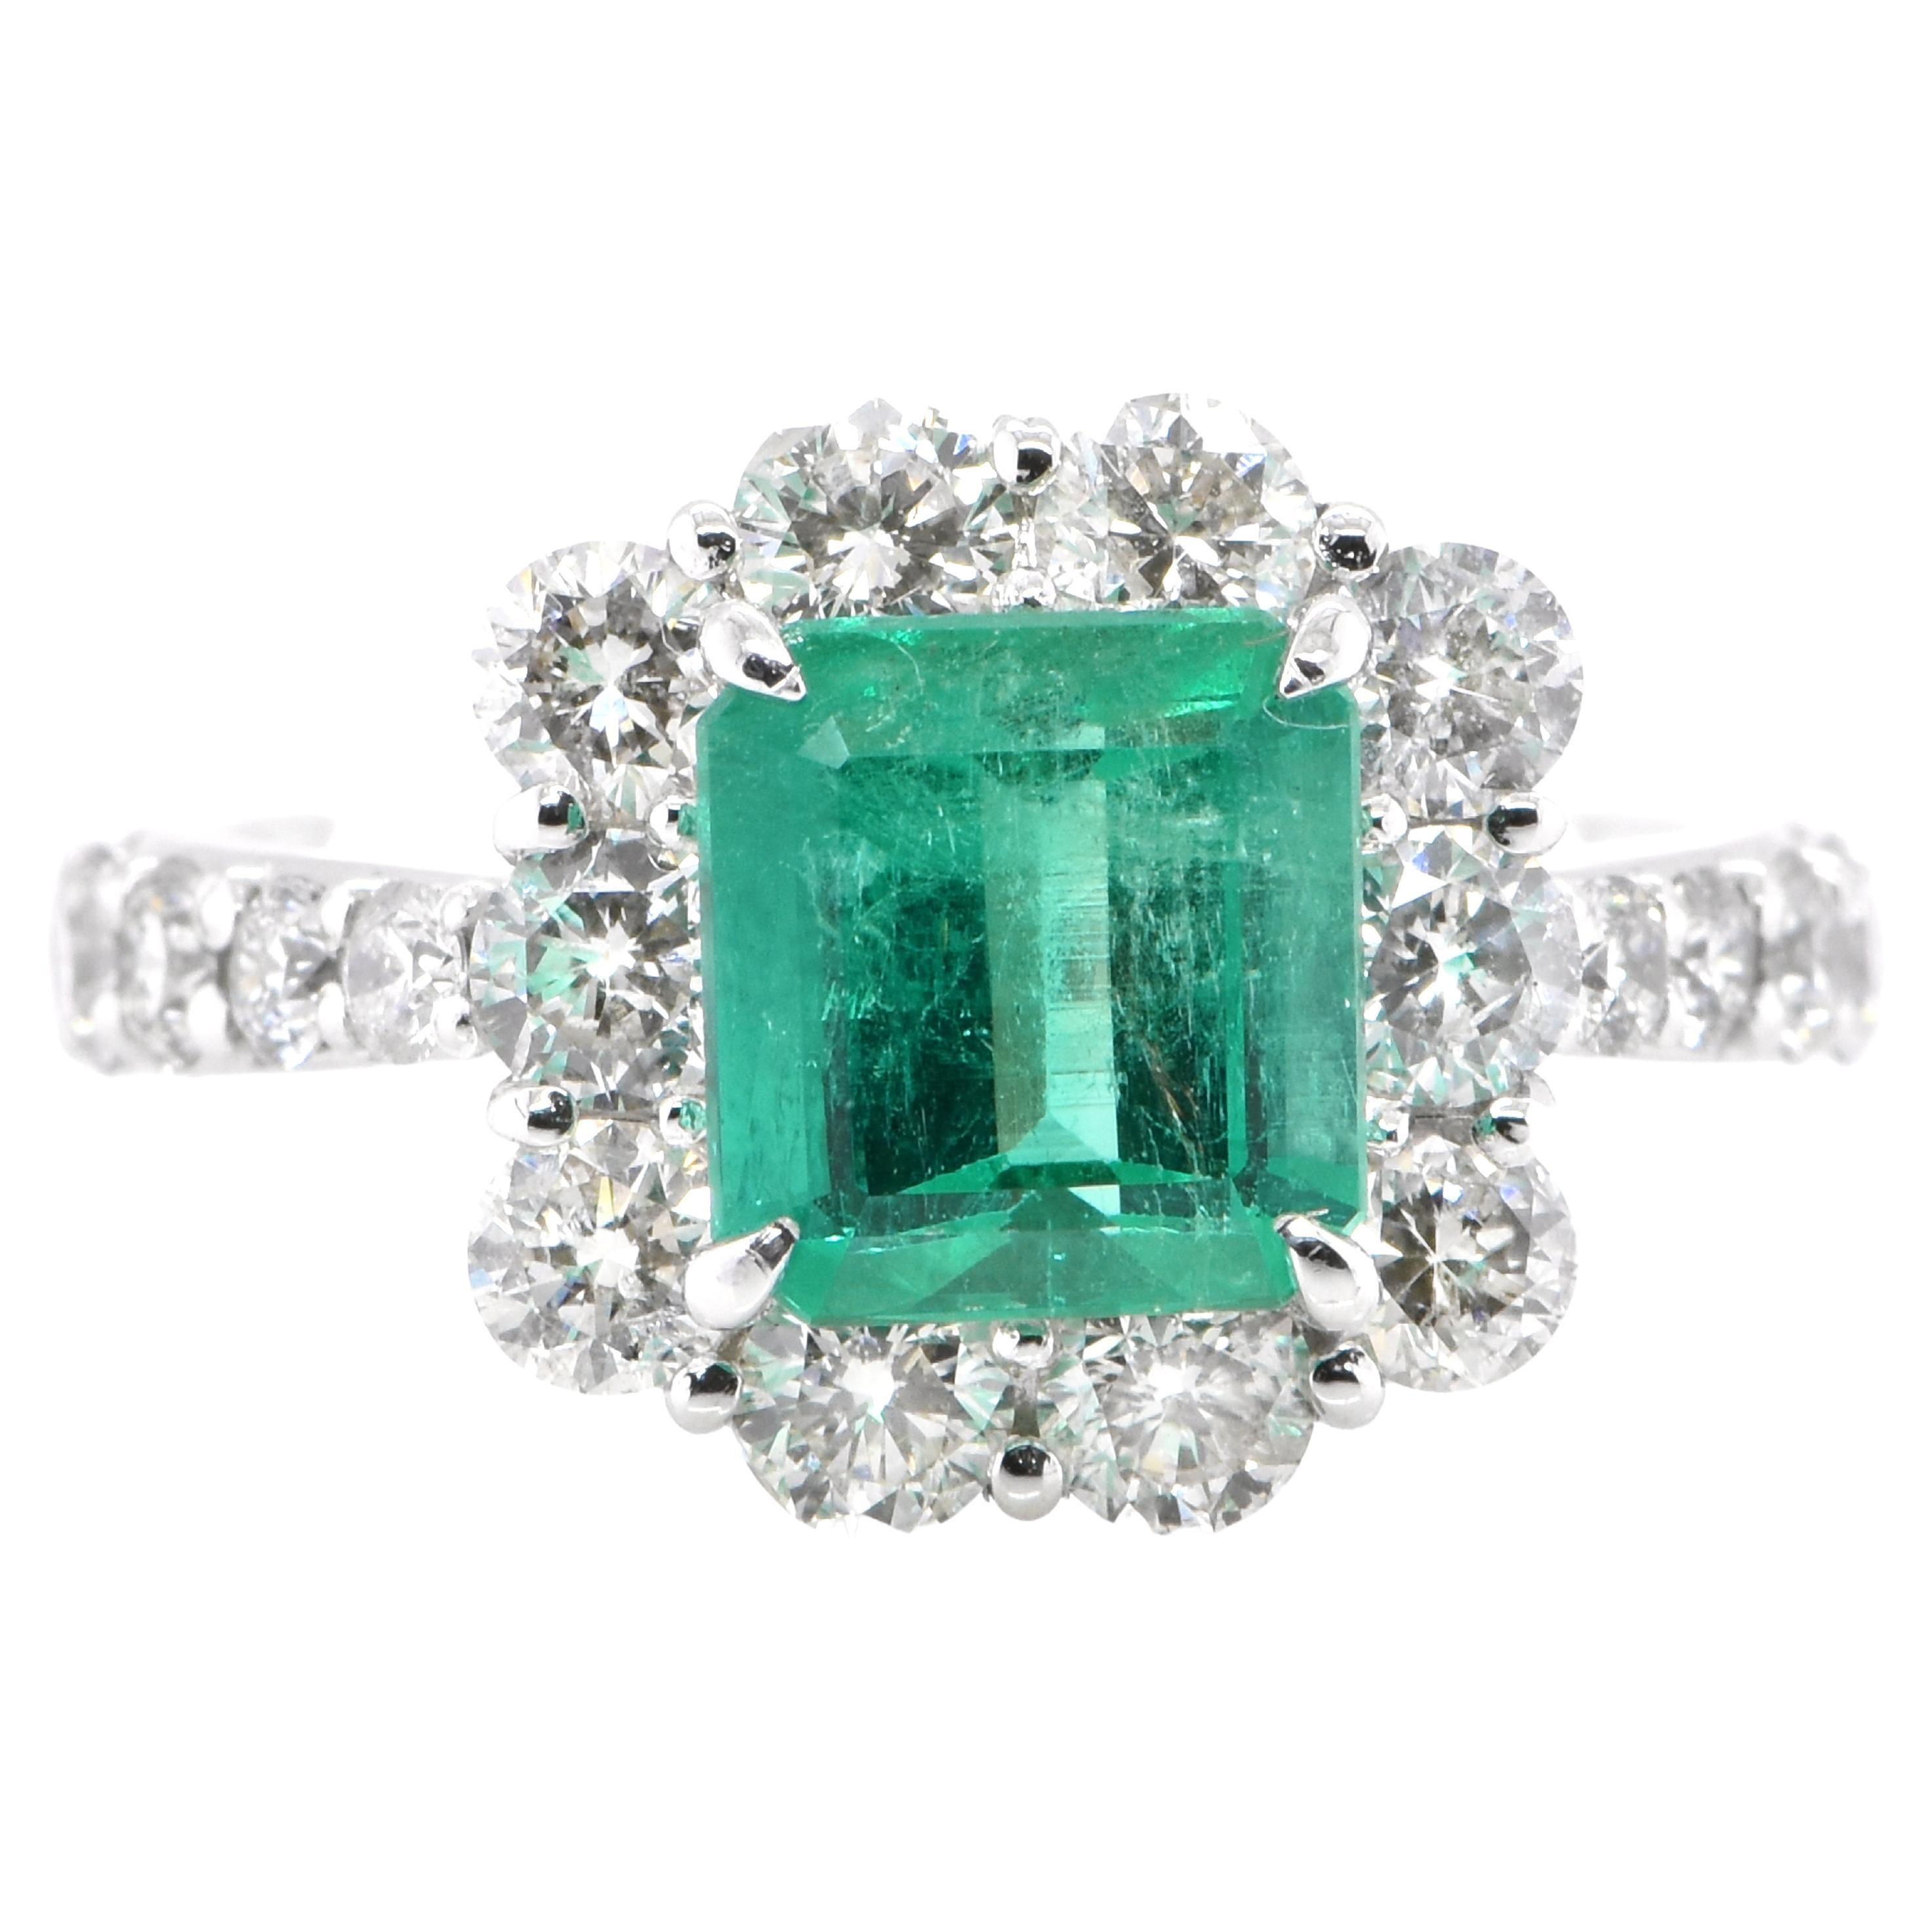 1.86 Carat Natural Colombian Emerald and Diamond Ring Set in Platinum